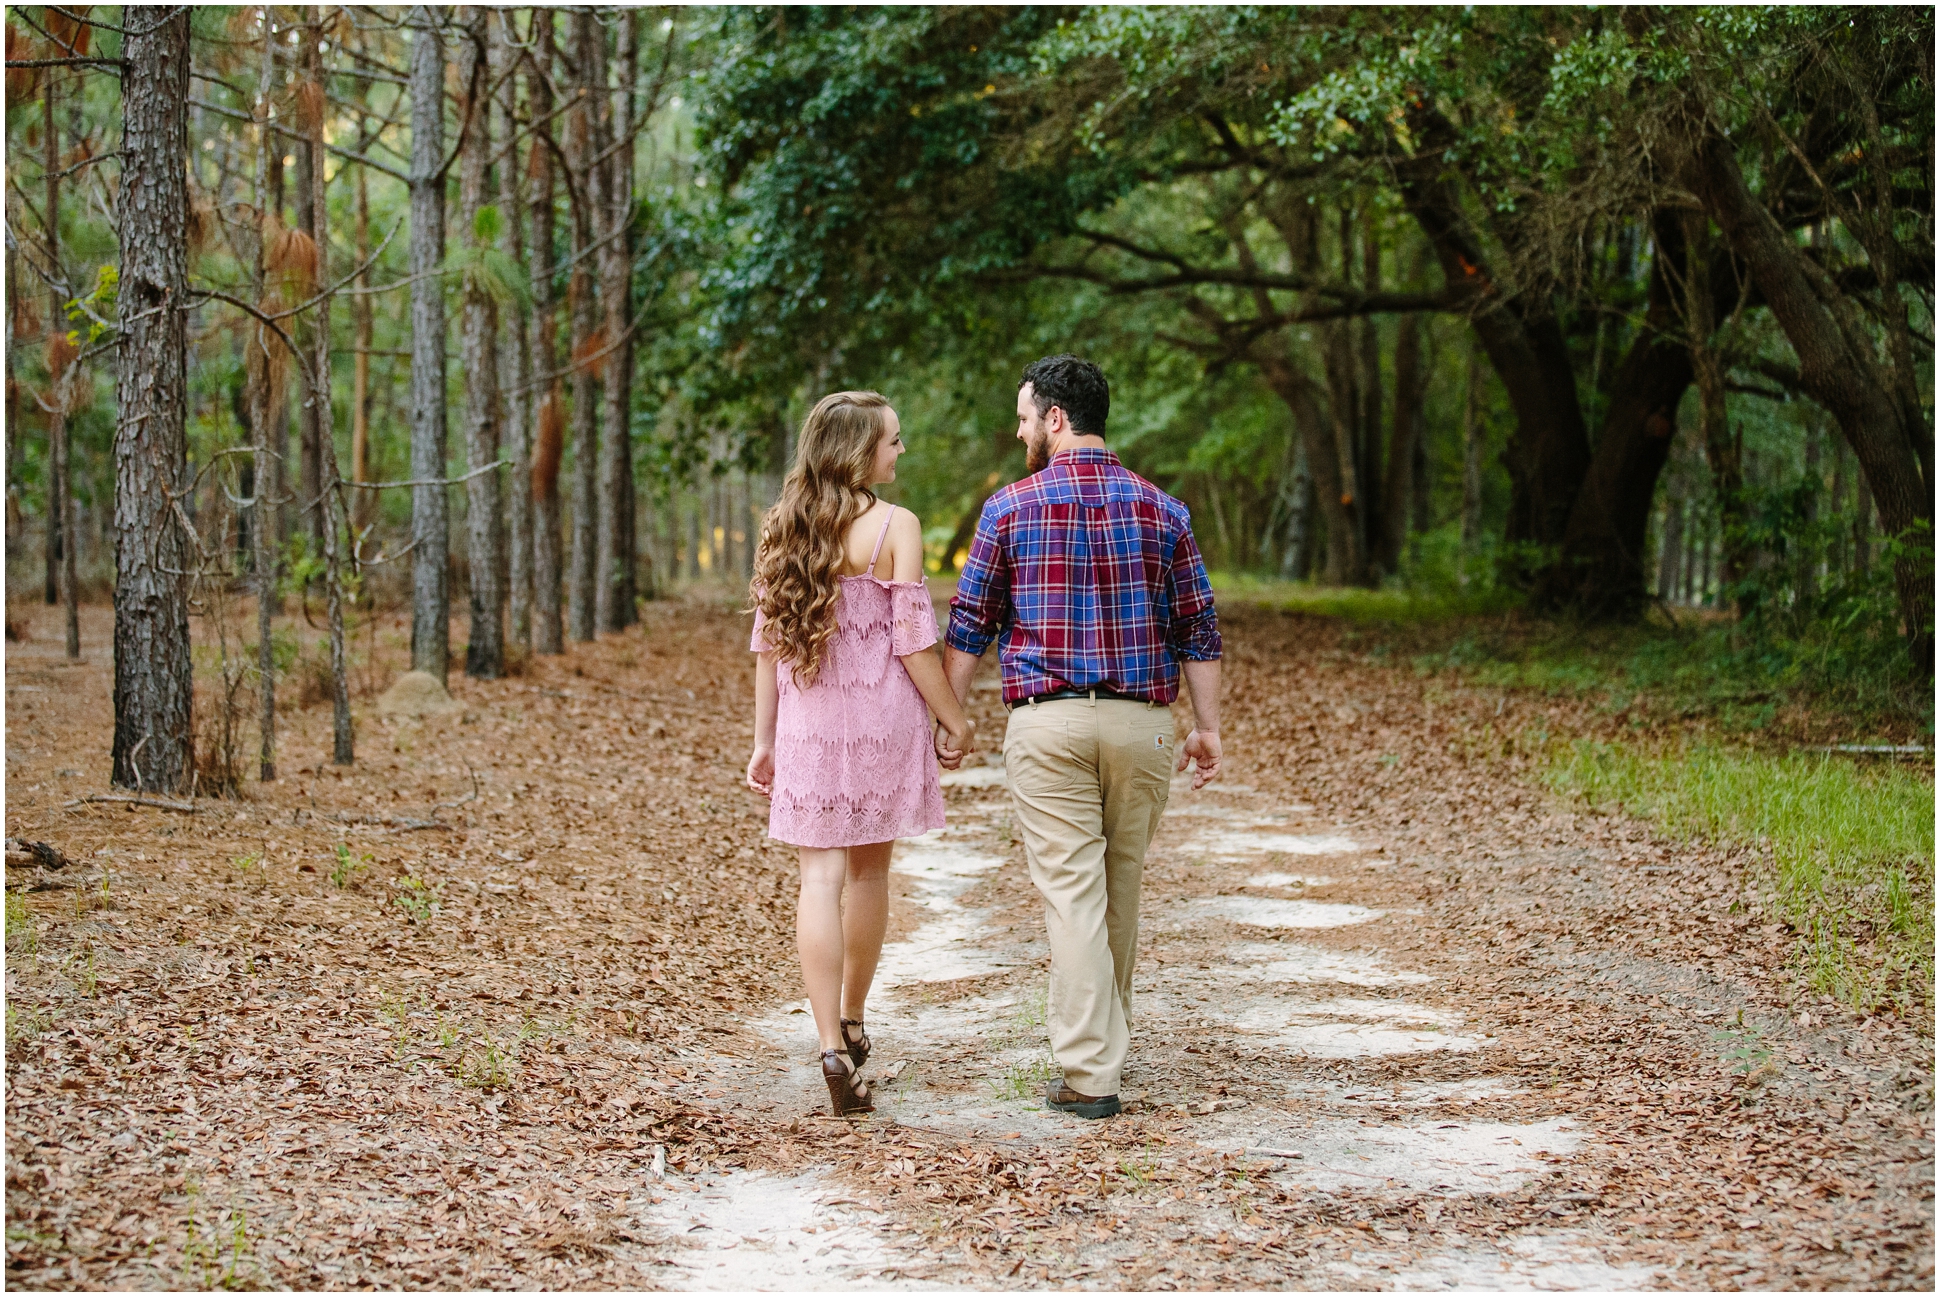 Two Chics Photography | A Countryside Engagement Session | www.twochicsphotography.com